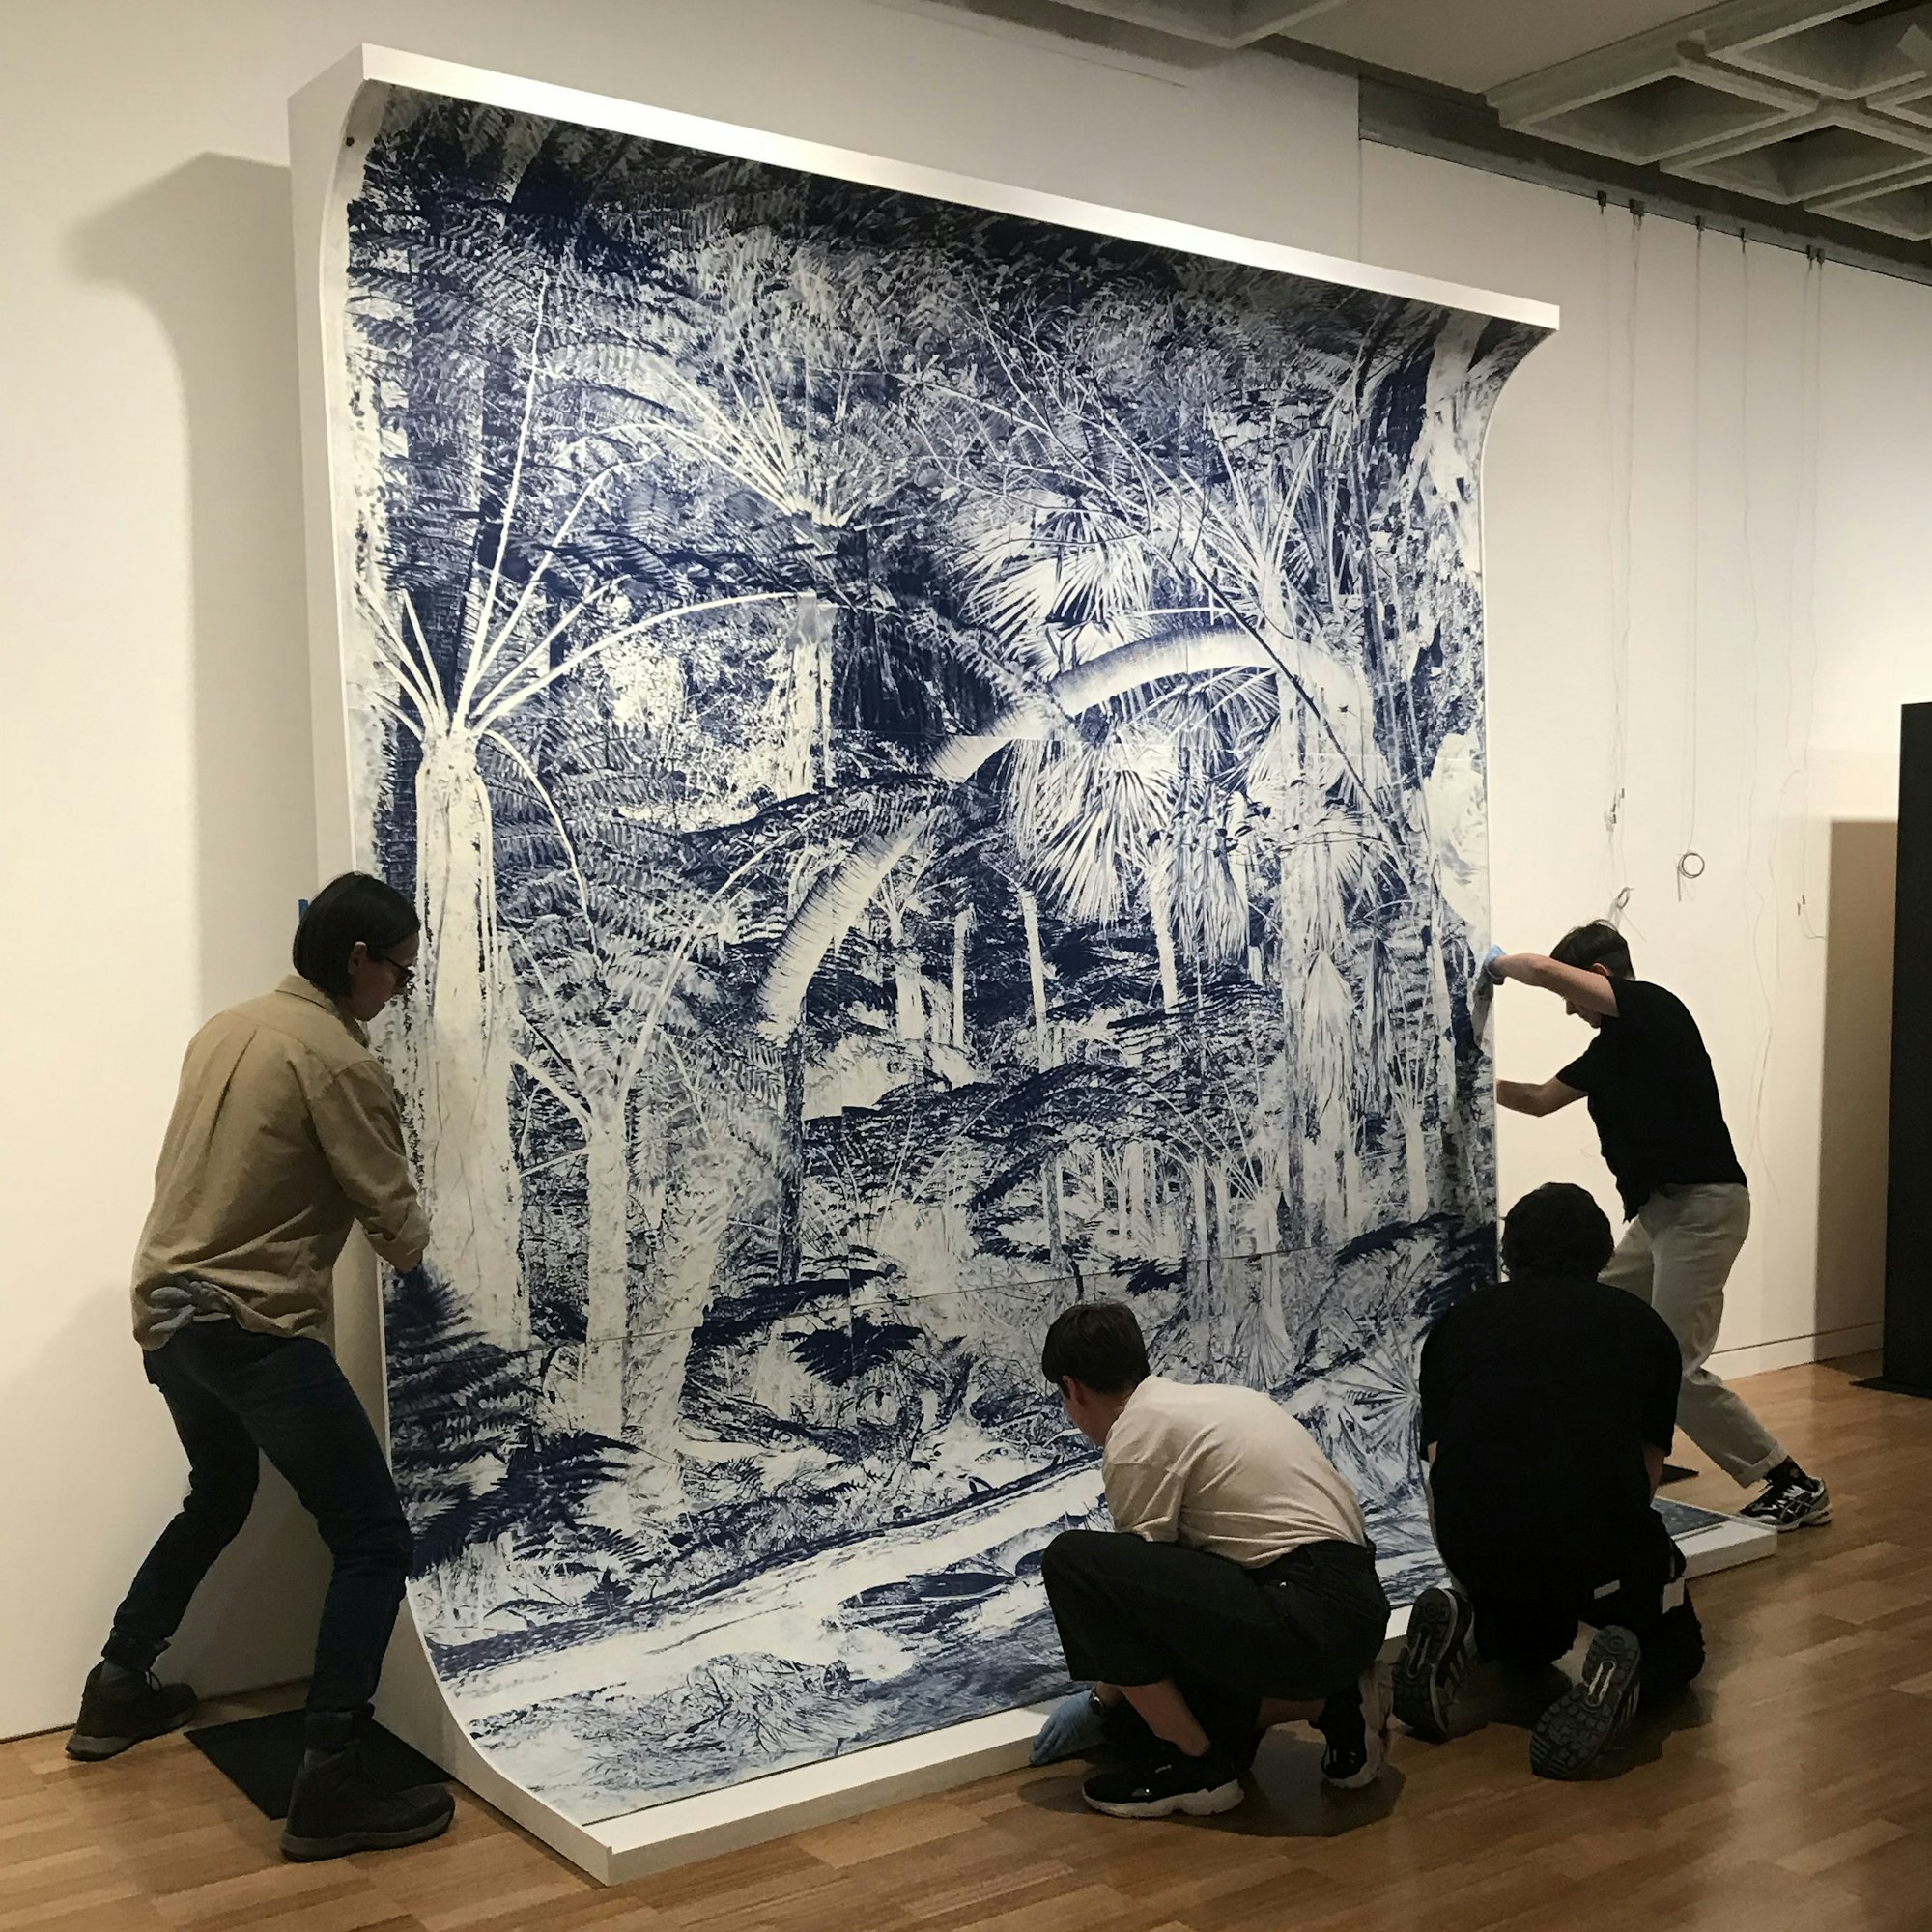 Four people move a large blue-and-white drawing on a curved white support into position against a gallery wall.